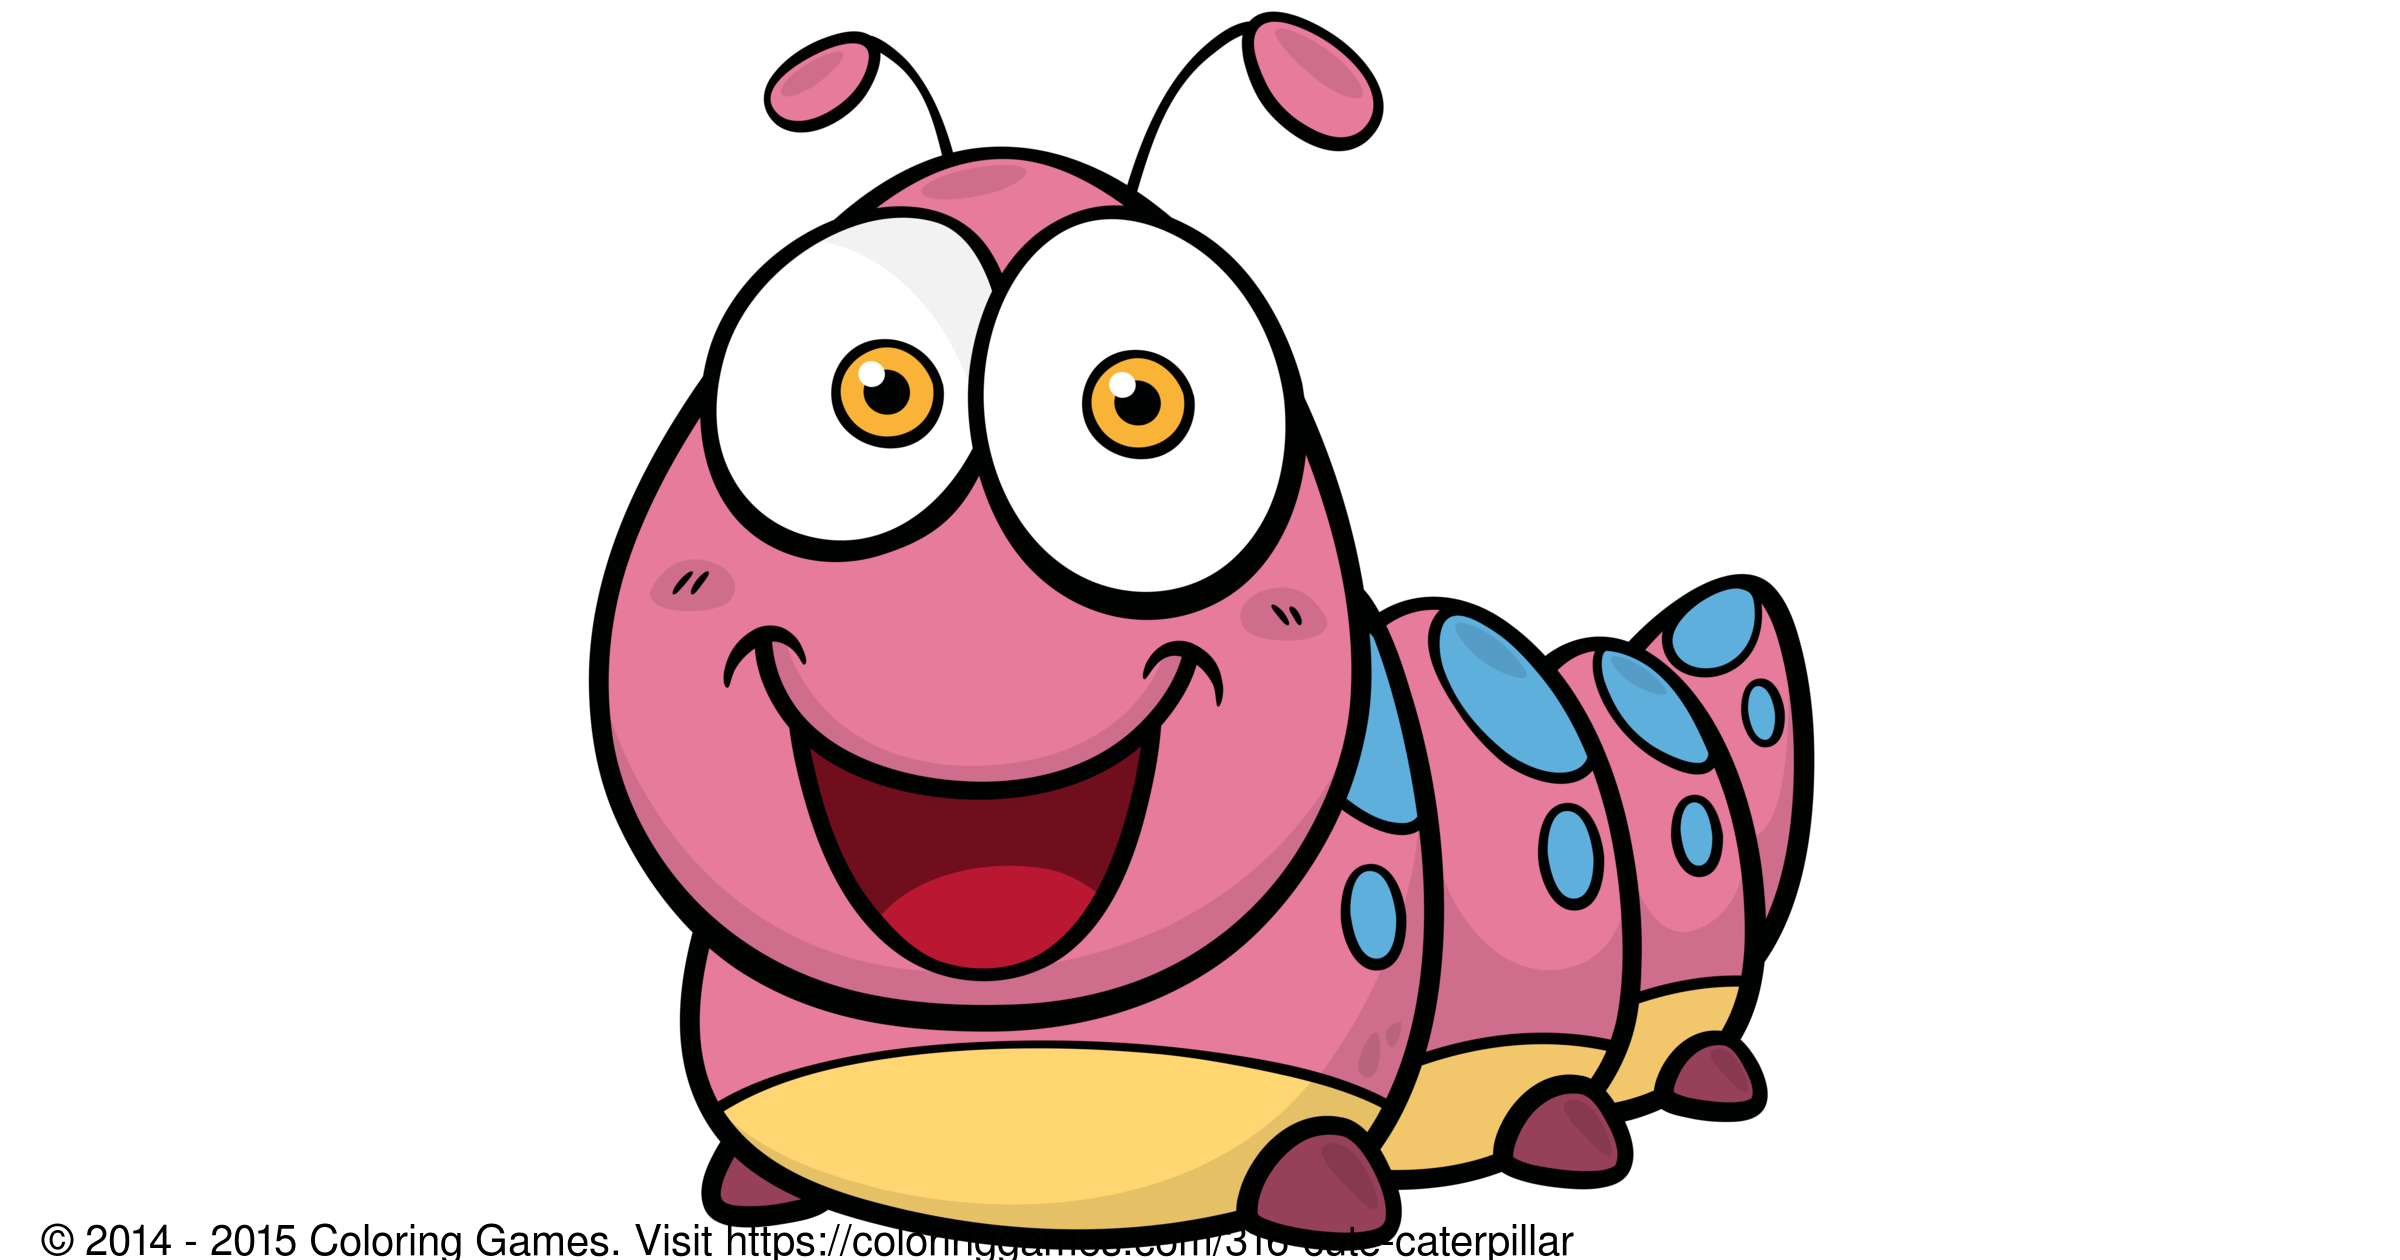 Cute Caterpillar - Coloring Games and Coloring Pages